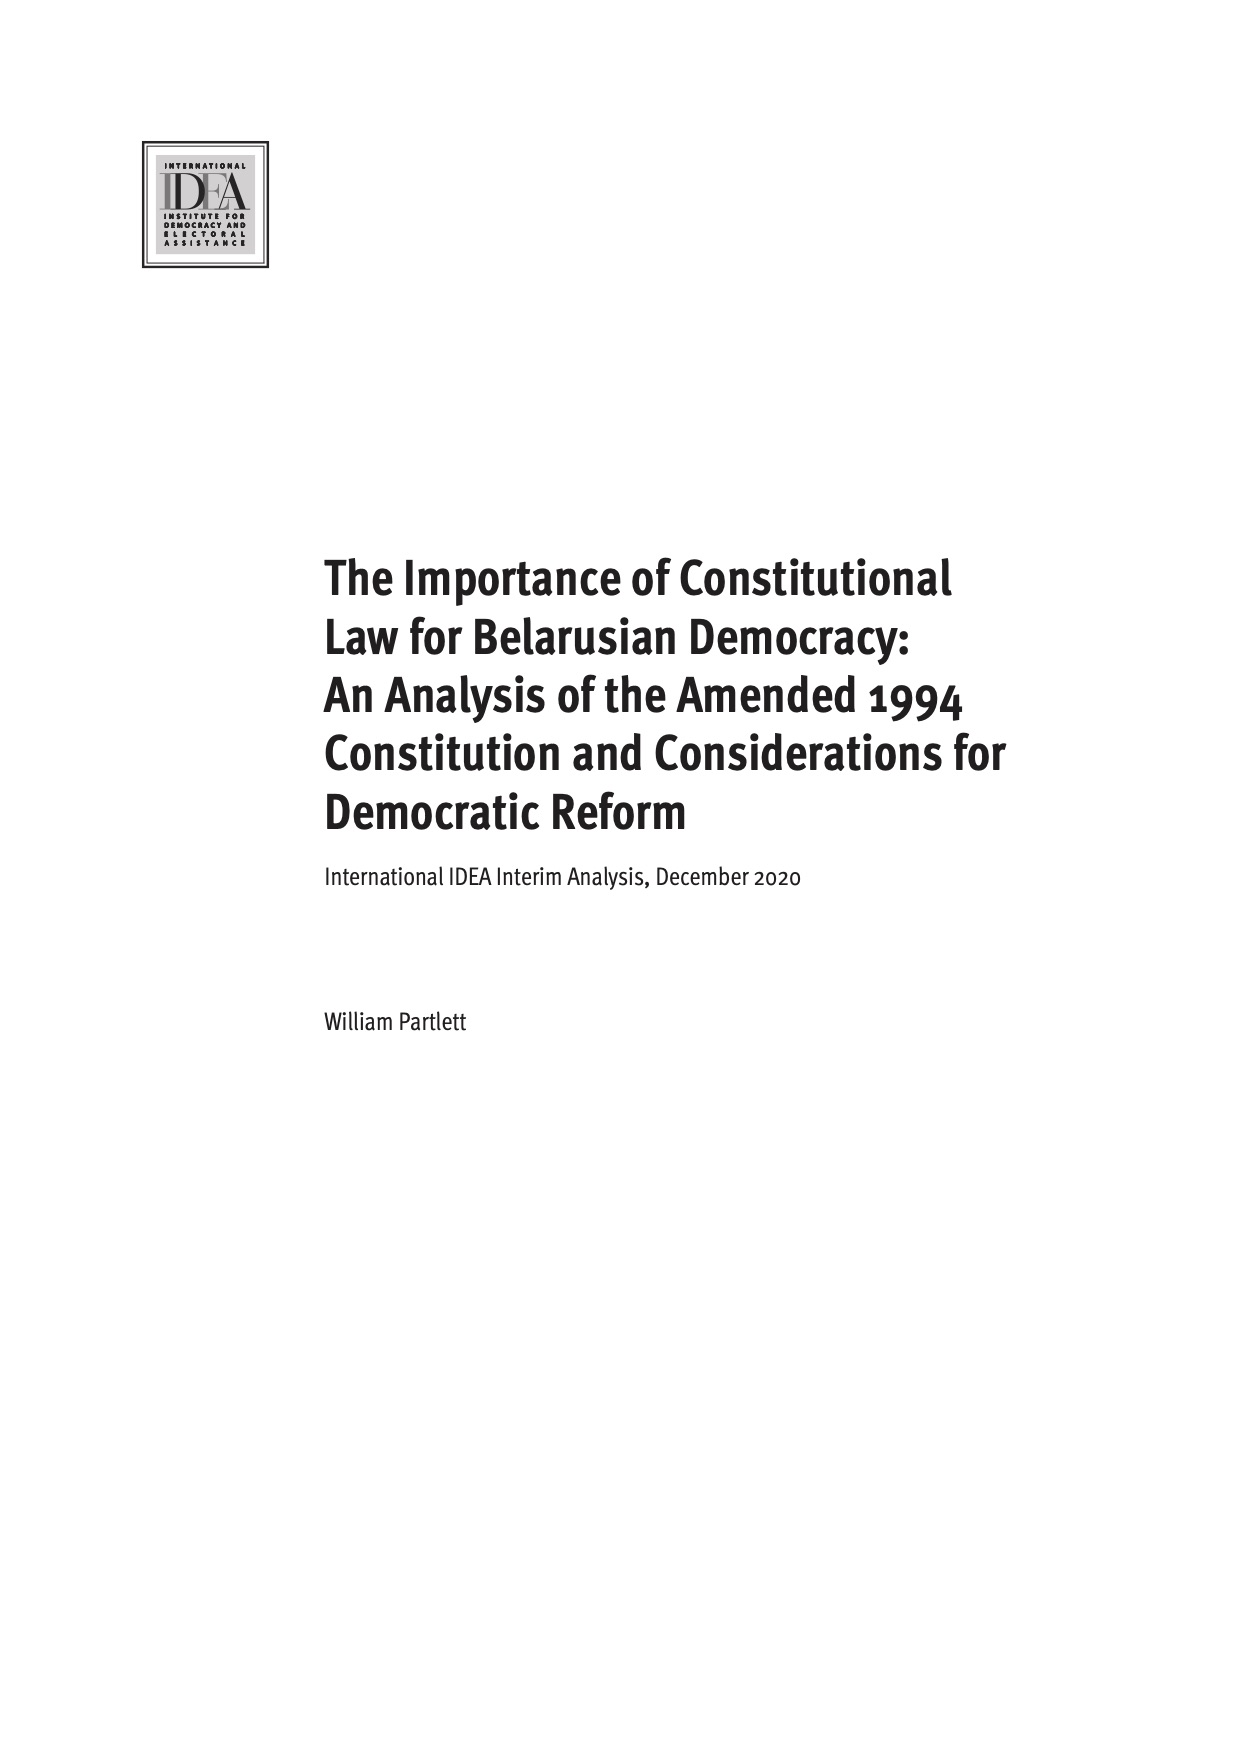 The Importance of Constitutional Law for Belarusian Democracy: An Analysis of the Amended 1994 Constitution and Considerations for Democratic Reform